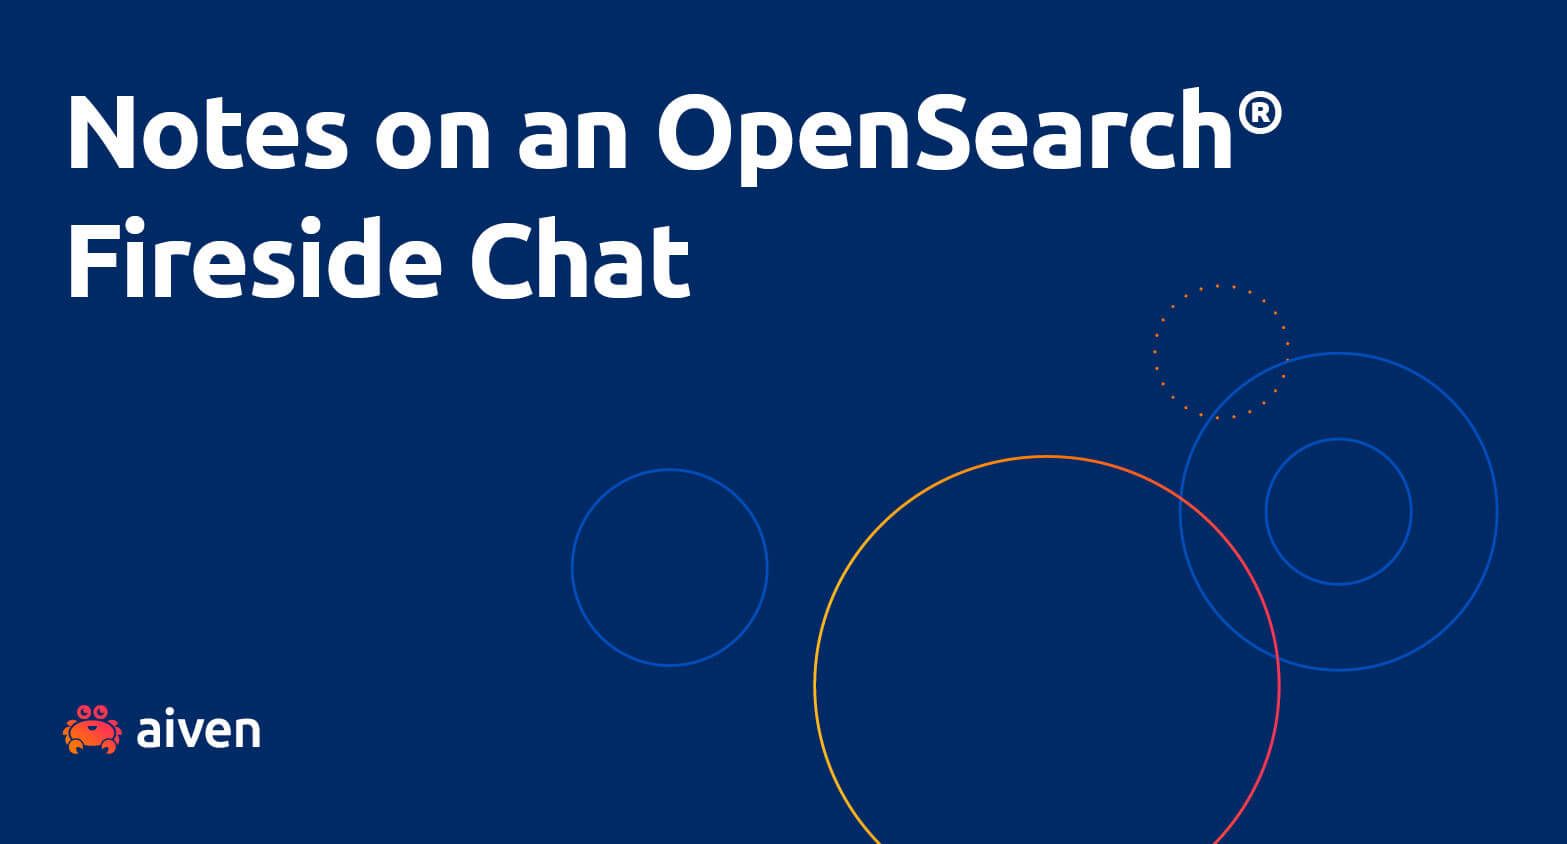 Test saying "Notes on an OpenSearch® Fireside Chat" against a blue background with the AIven cuddly crab logo at the bottom left